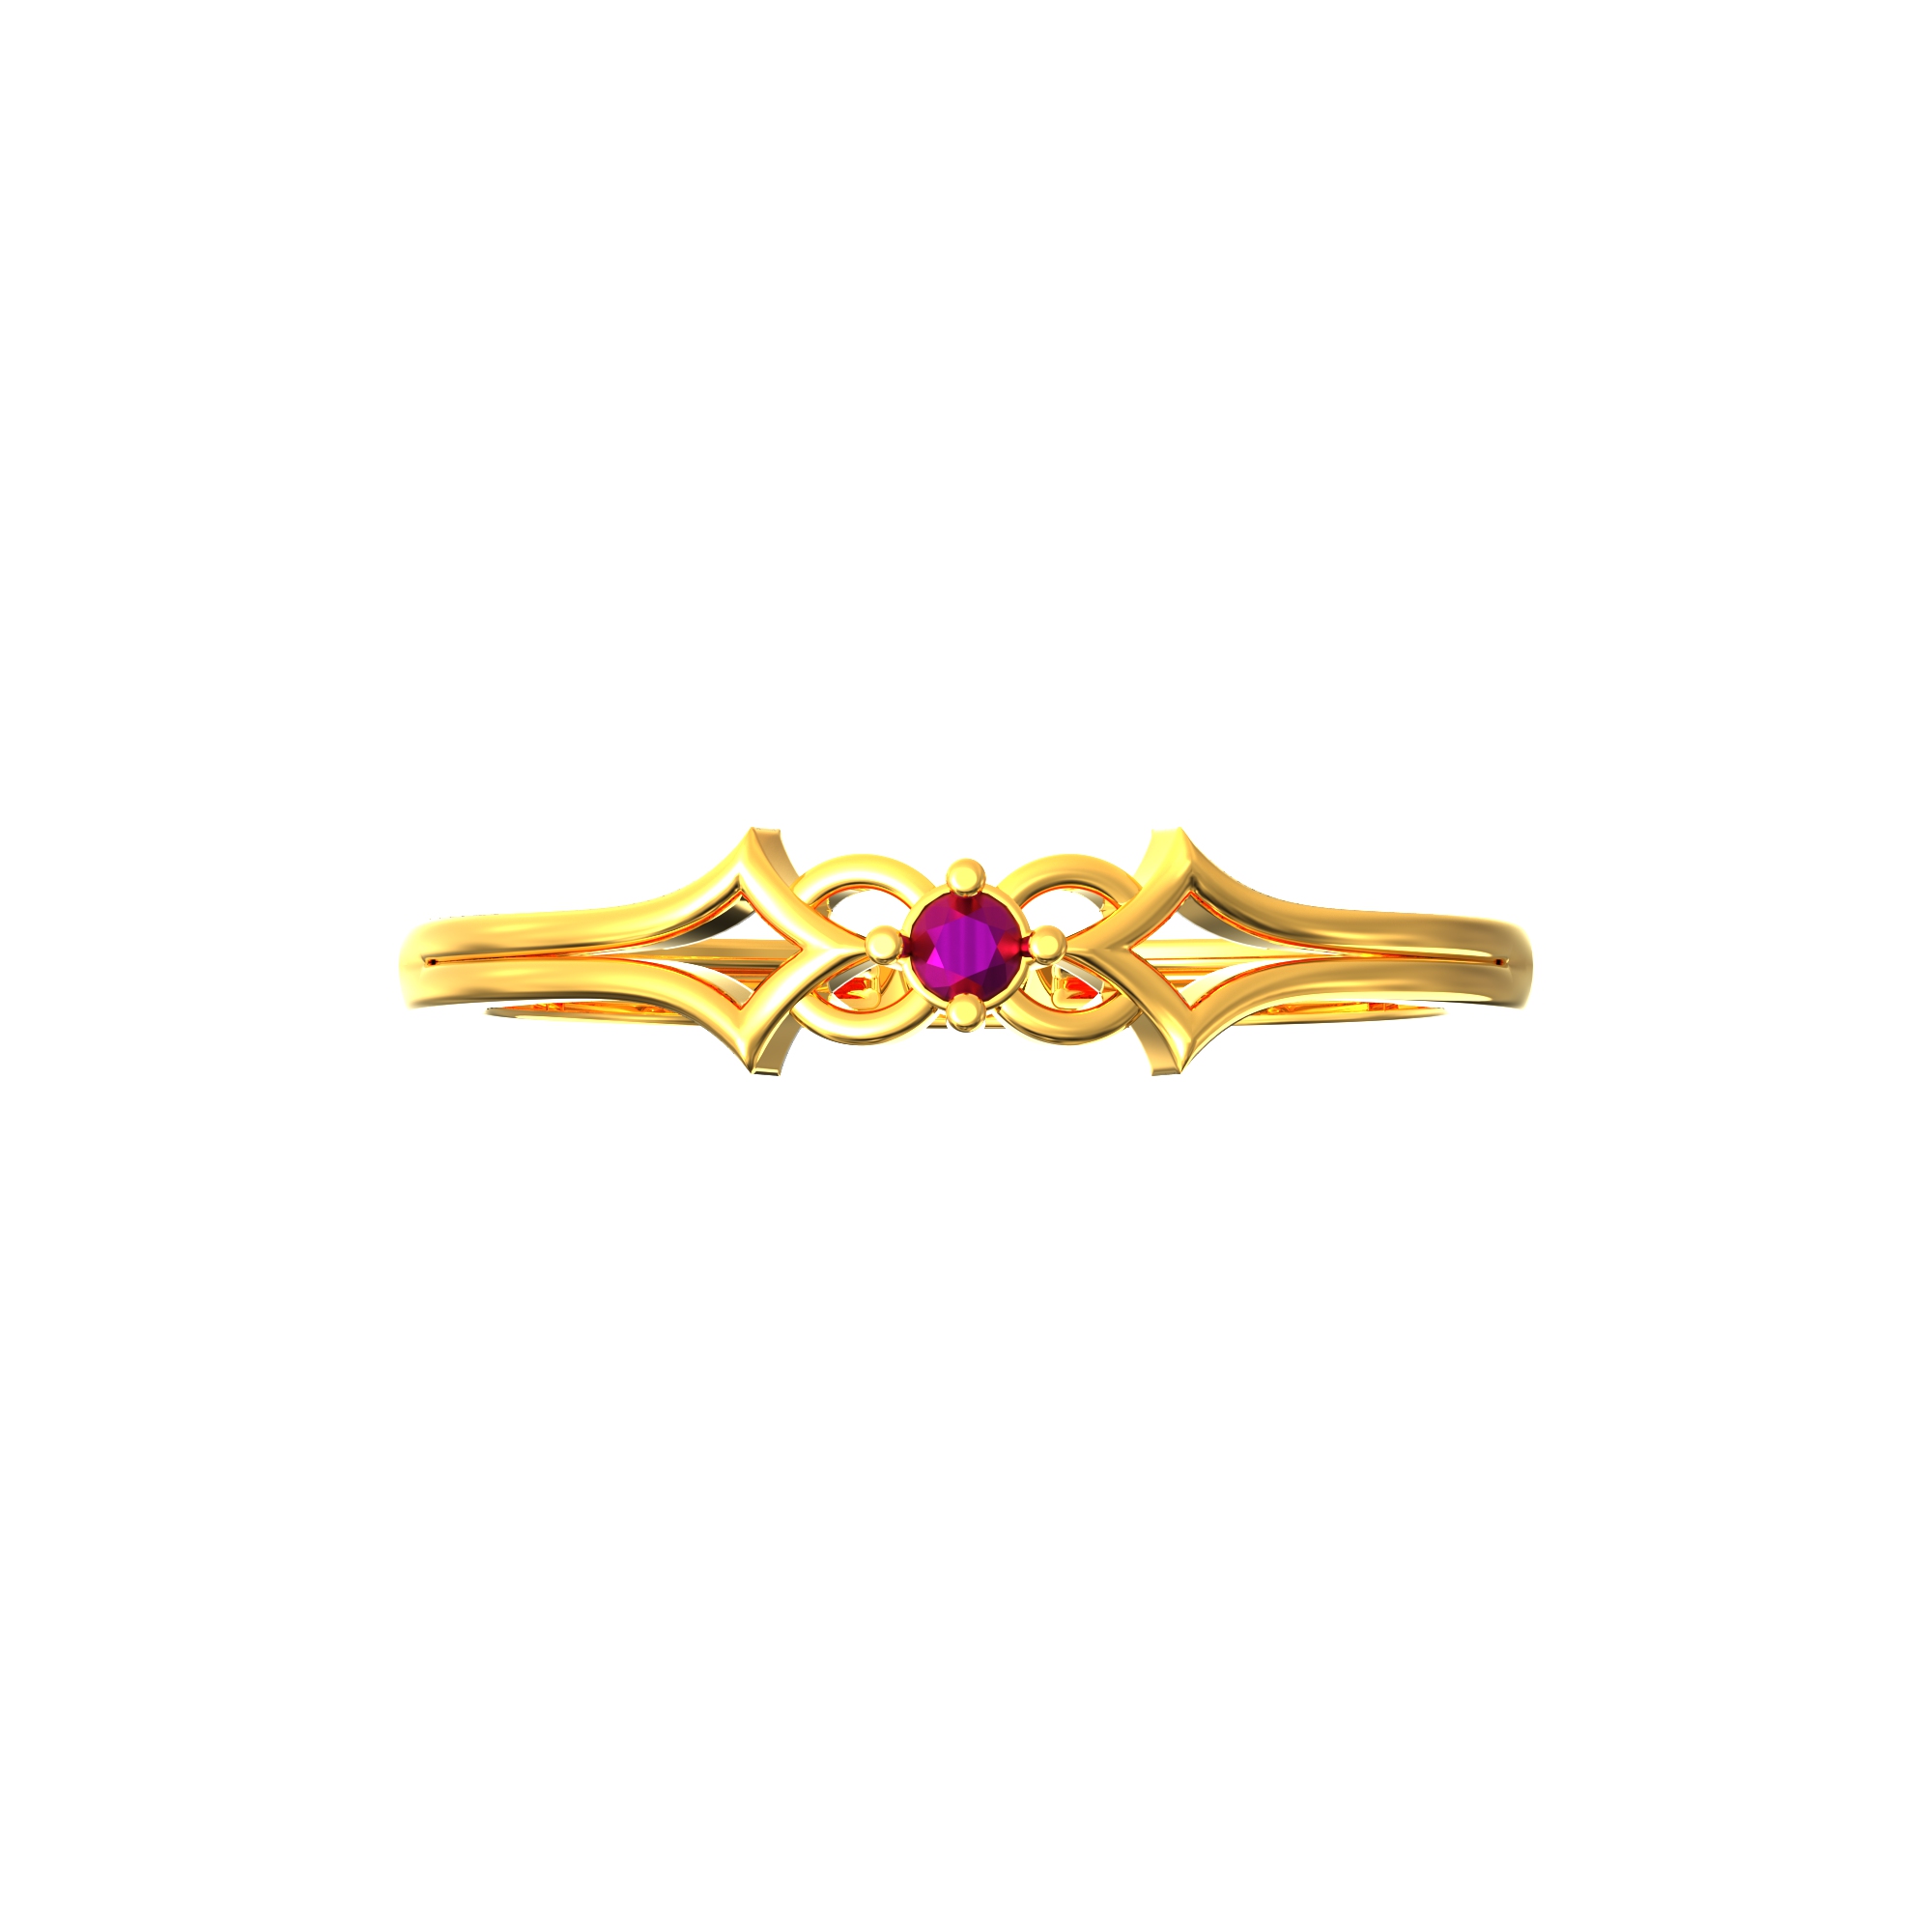 Buy Gold Ring | Gold Ring Design For Male Without Stone | Kalyan